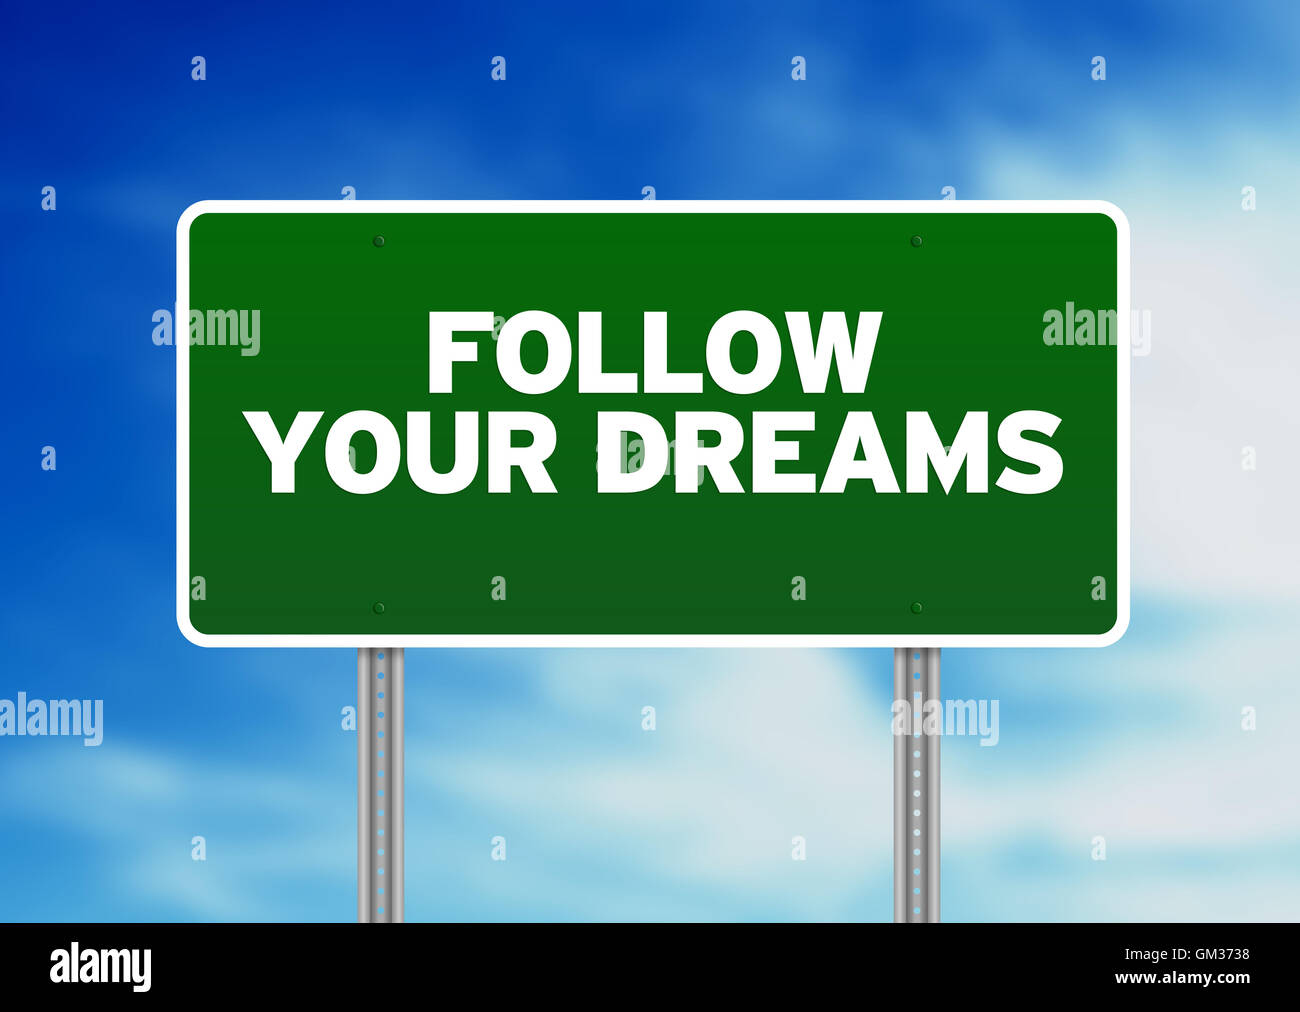 Green Road Sign - Follow Your Dreams Stock Photo